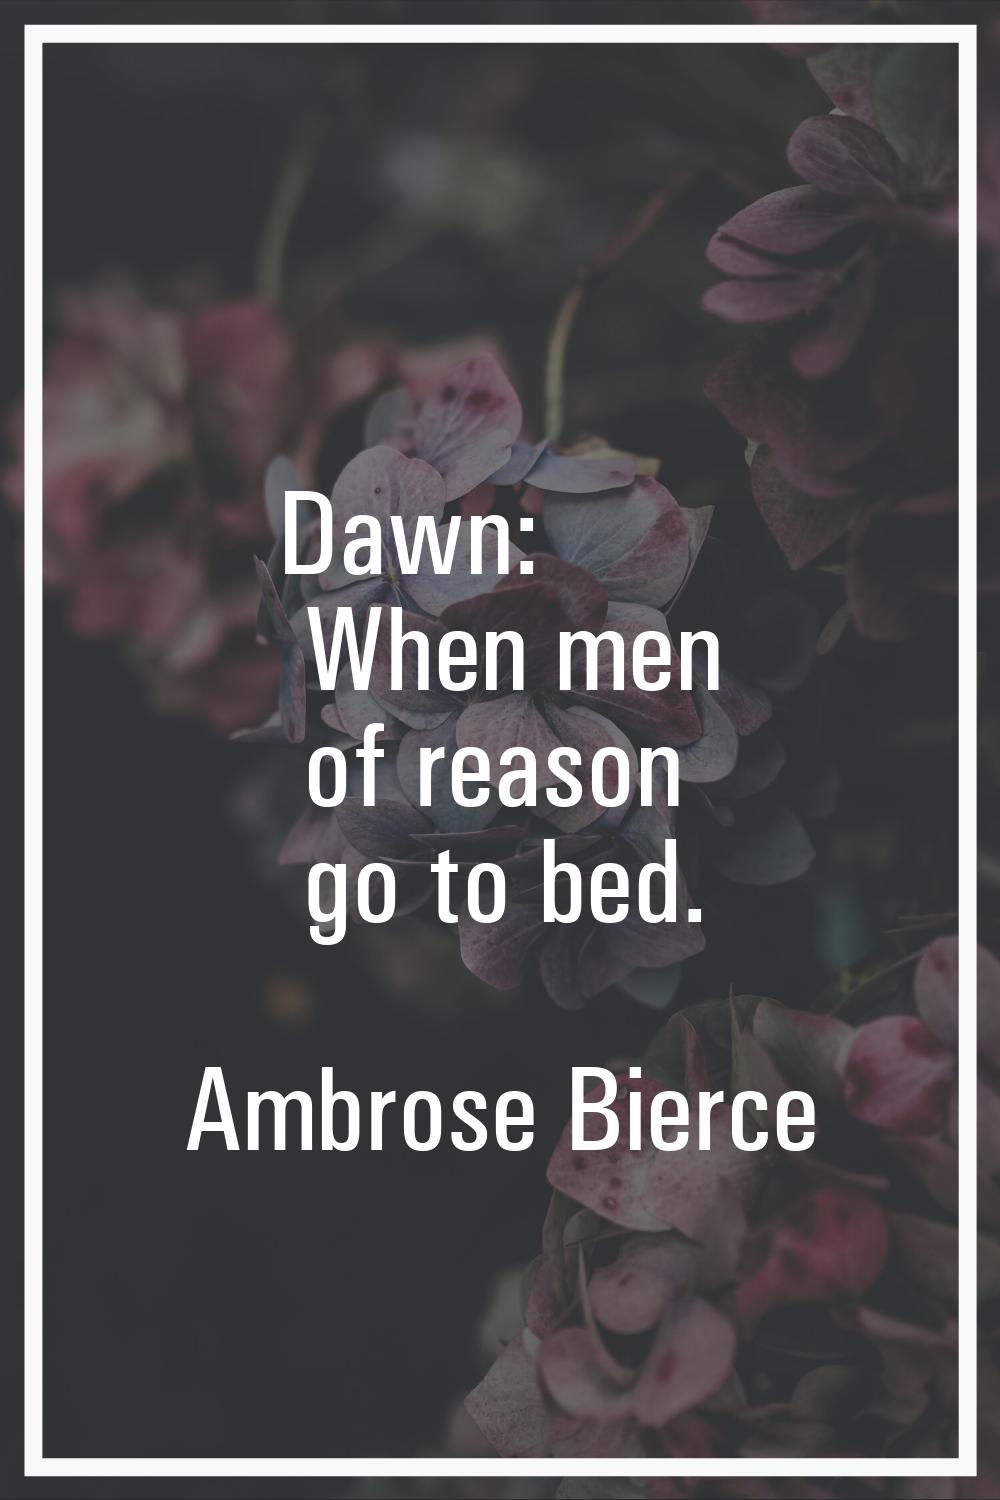 Dawn: When men of reason go to bed.